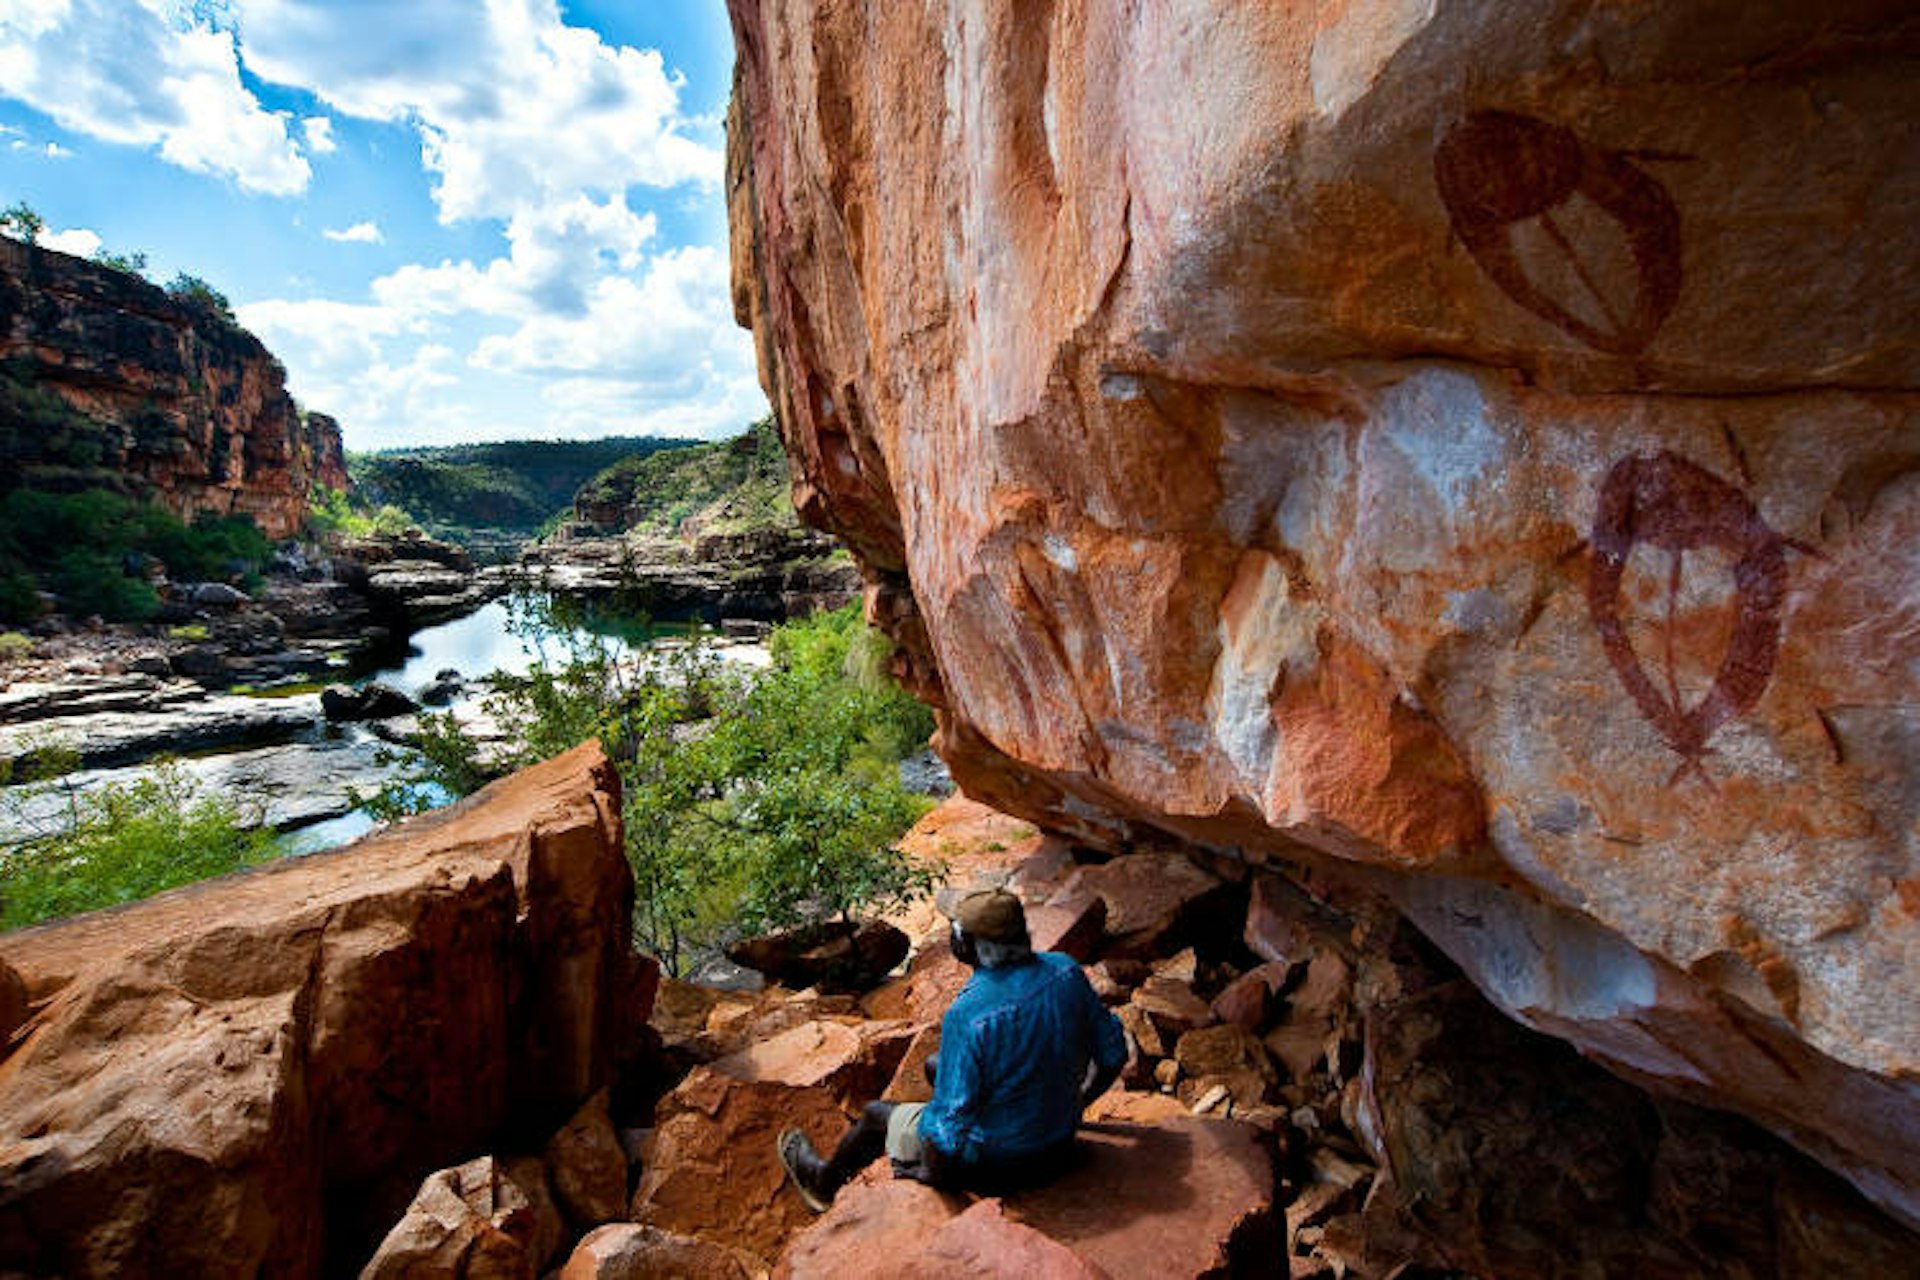 Bradshaw rock art in the Kimberley region. Image by Kerry Lorimer / Lonely Planet Images / Getty Images